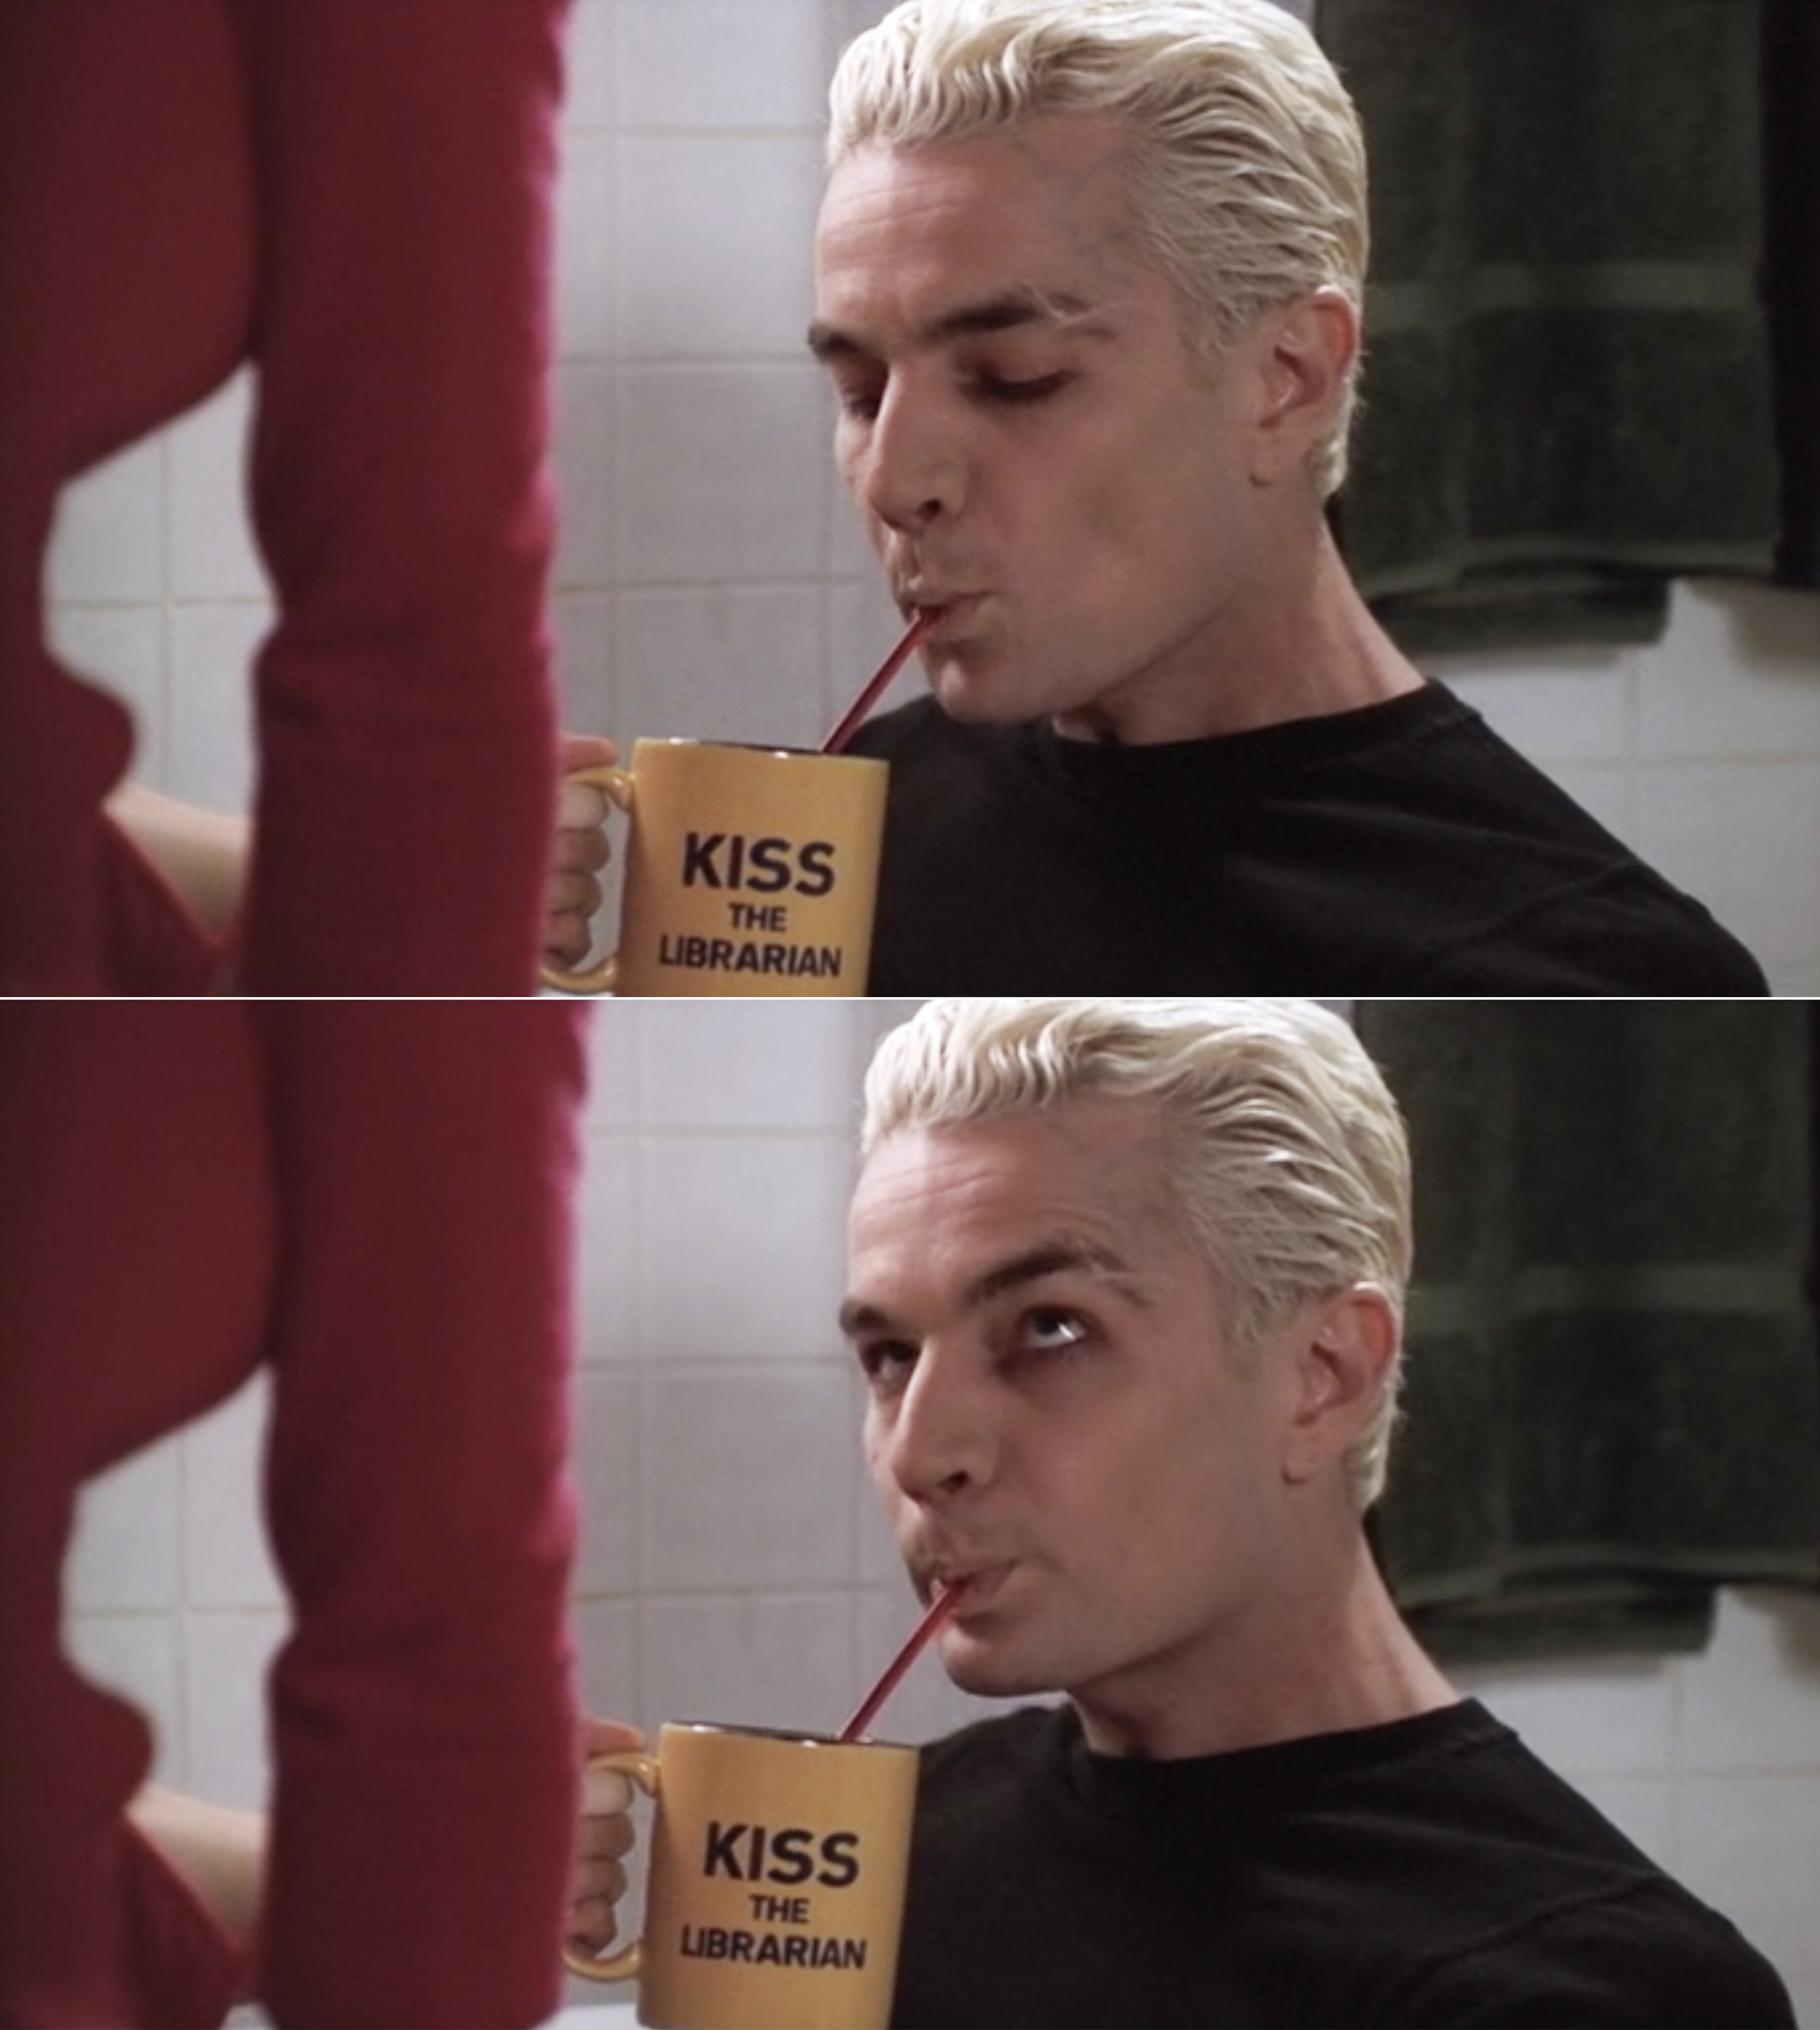 Spike drinking blood from a &quot;kiss the librarian&quot; mug